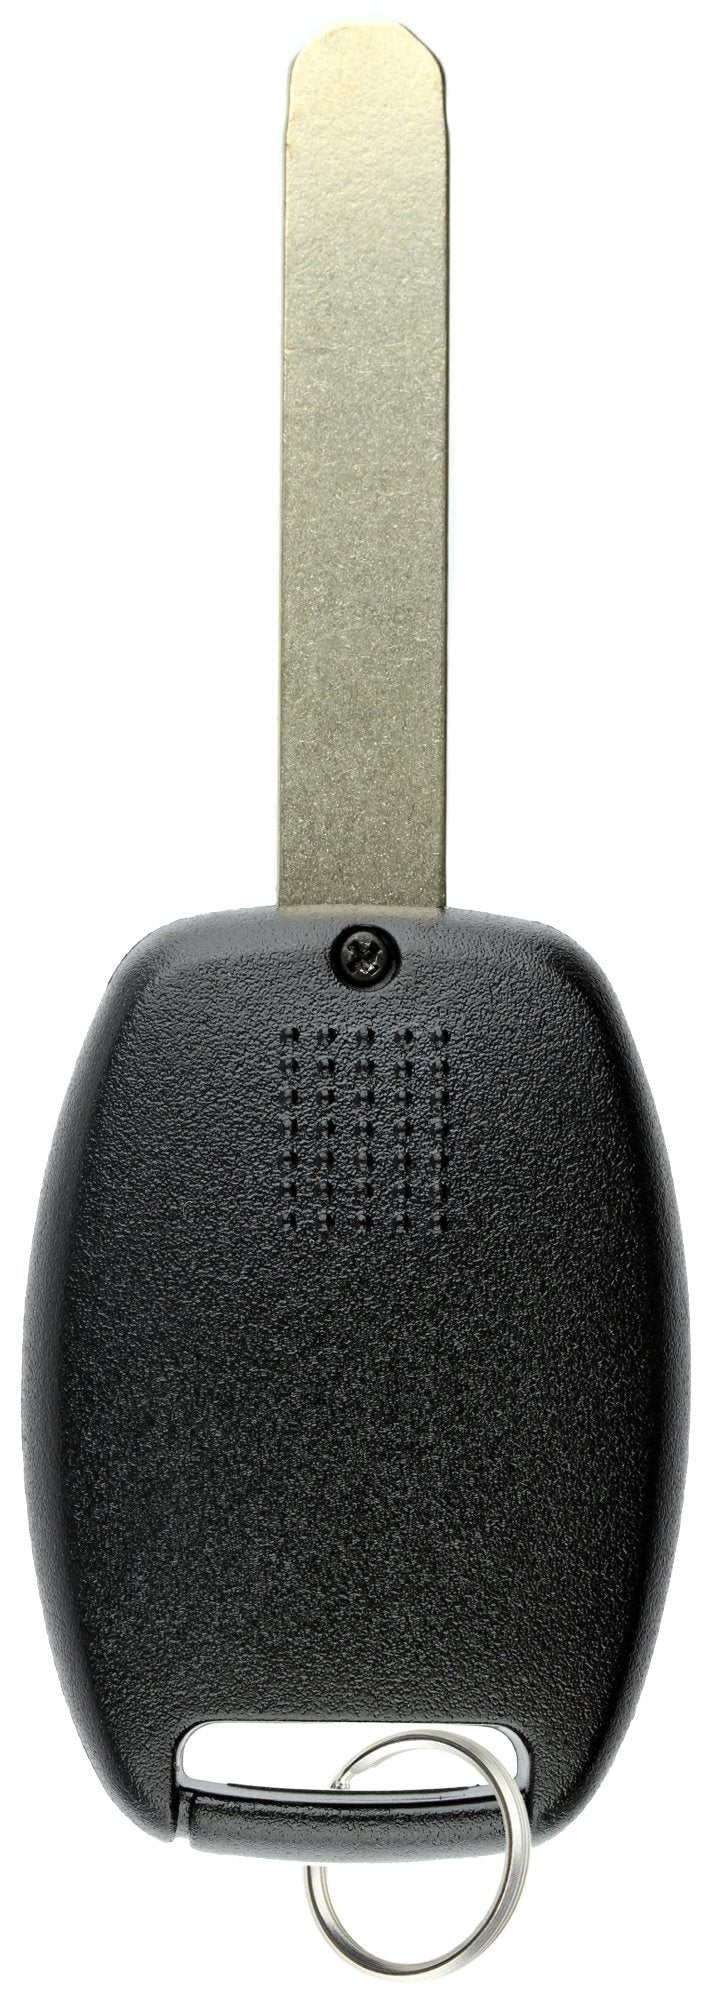  [AUSTRALIA] - KeylessOption Keyless Entry Remote Control Uncut Car Ignition Key Fob Replacement for OUCG8D-380H-A black